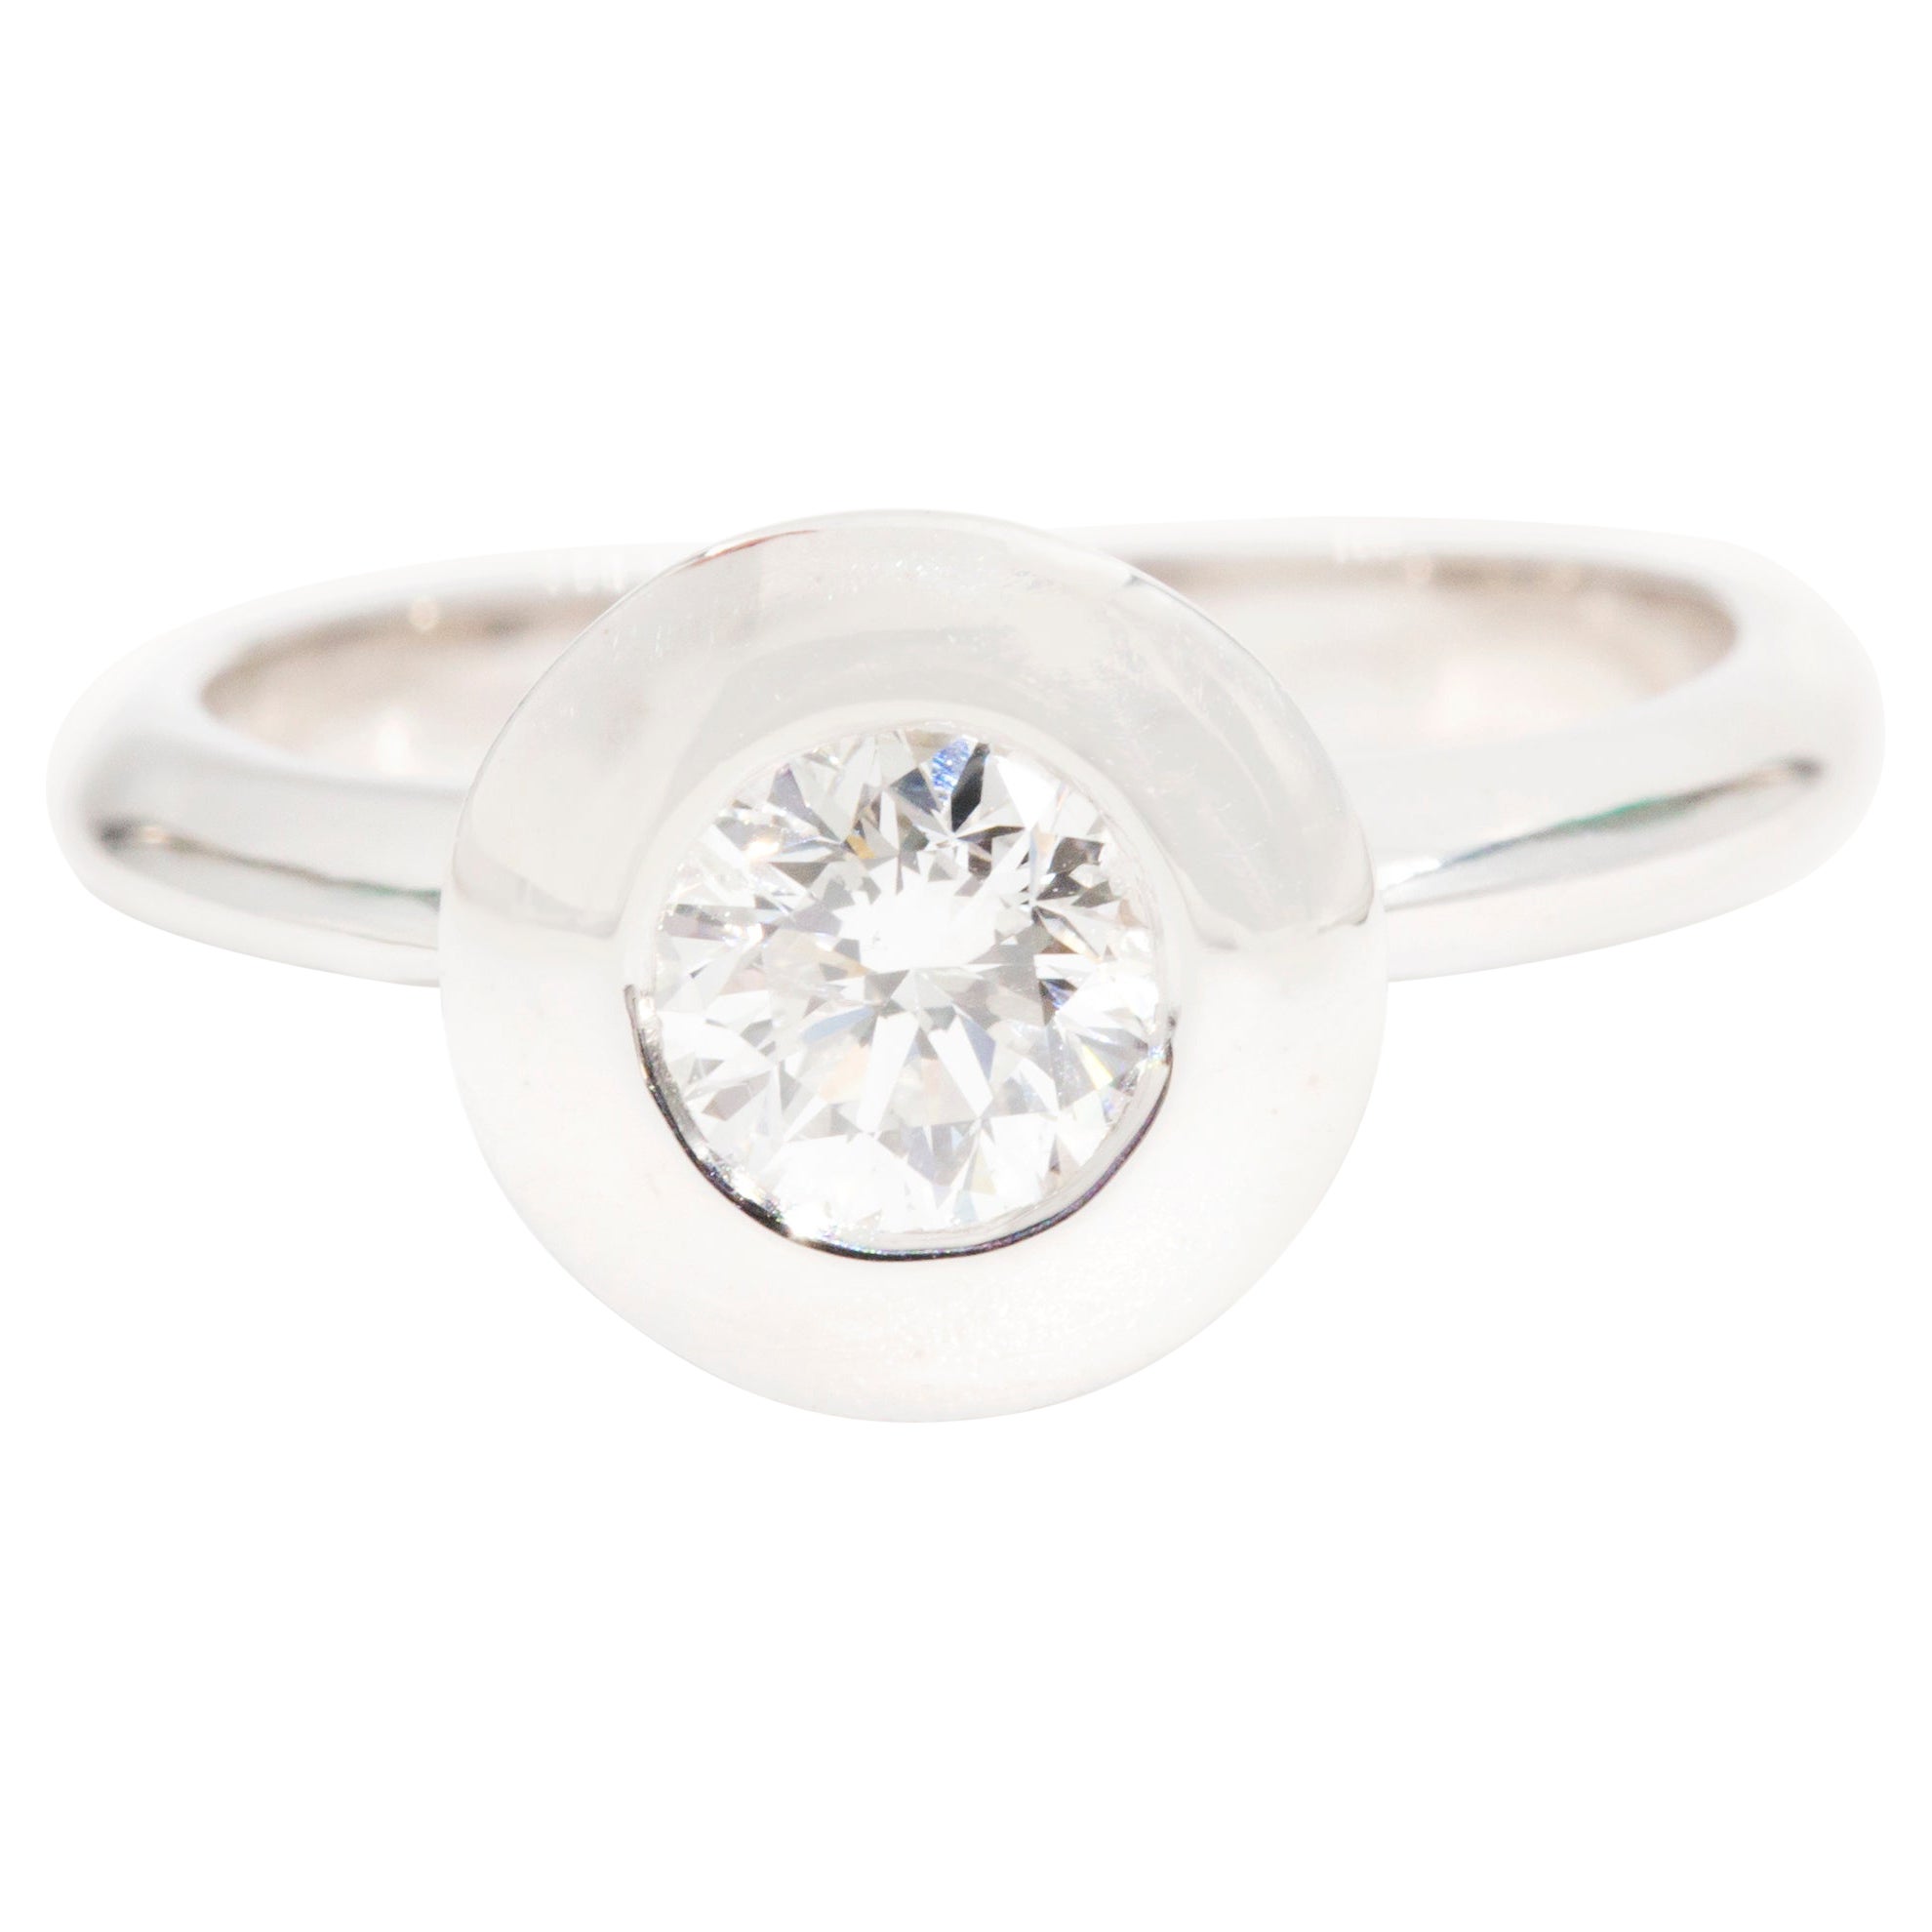 0.65 Carat Round Brilliant Diamond Vintage Solitaire Ring in 18 Carat White Gold For Sale